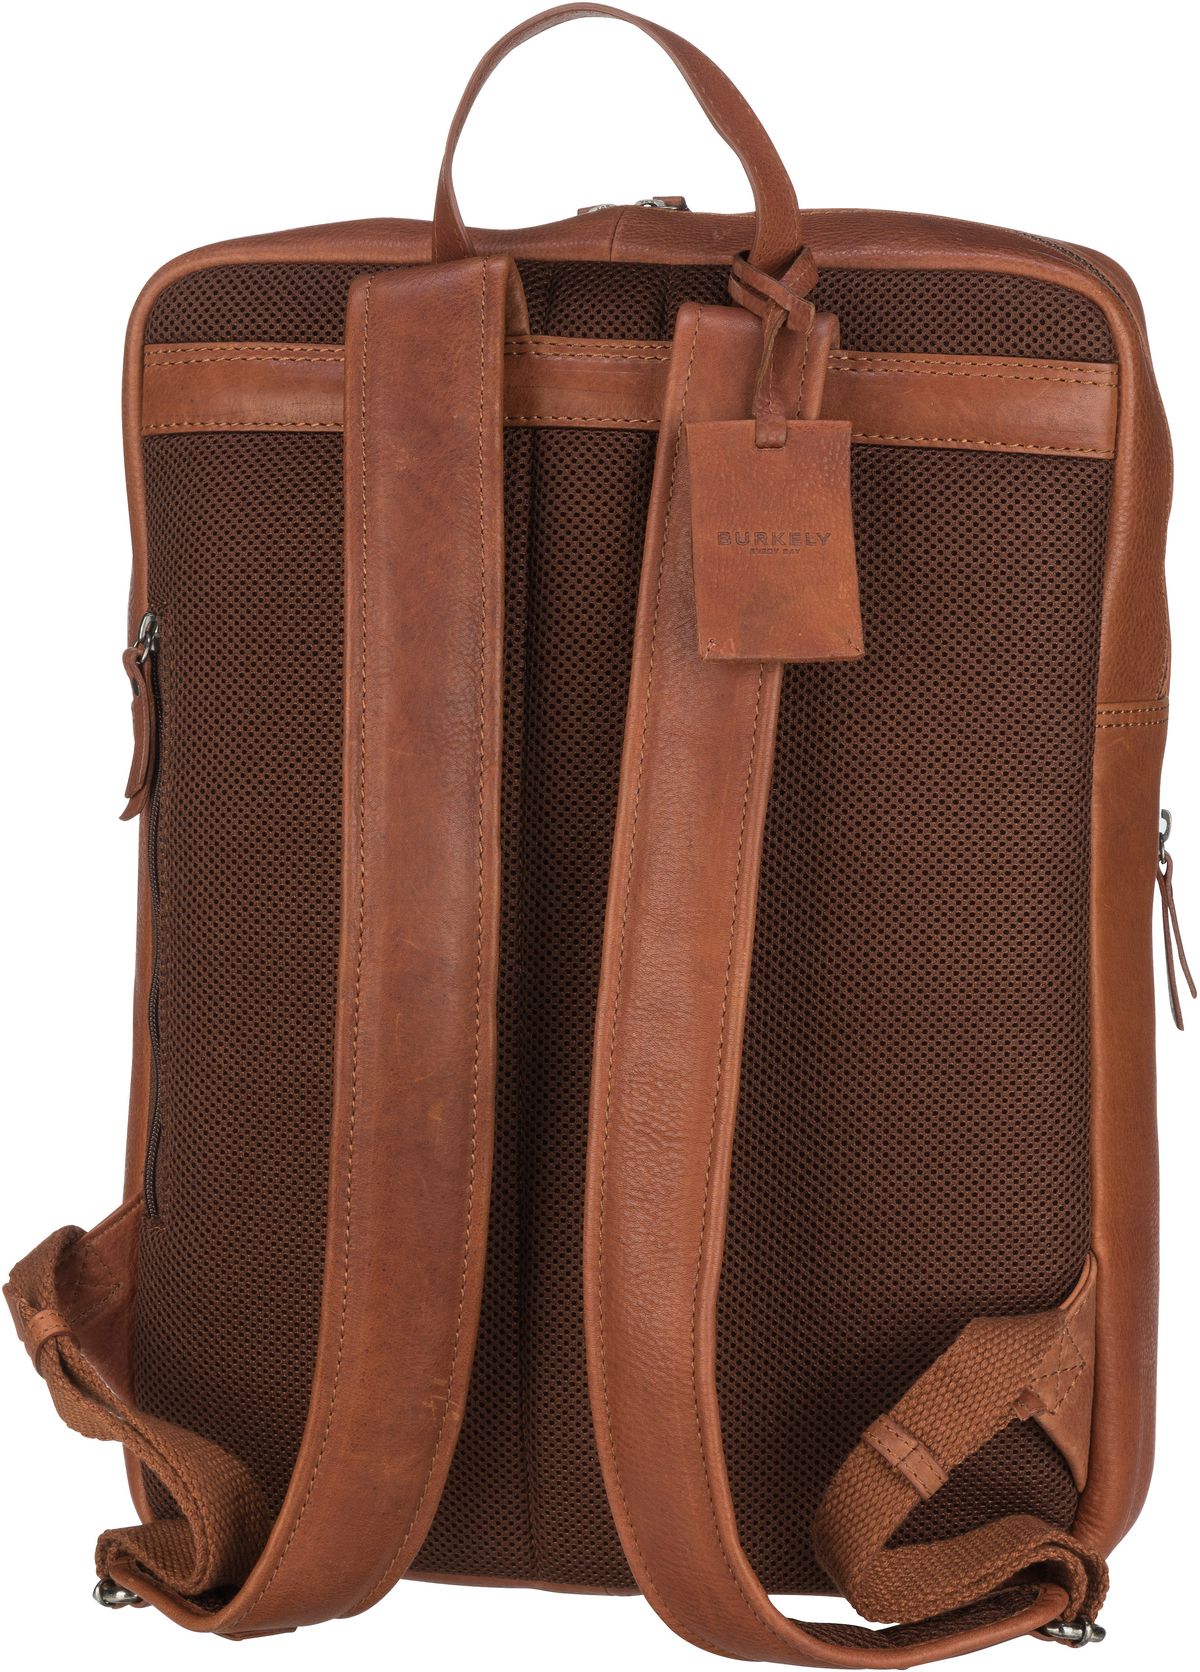 Burkely Antique Avery Backpack 5364 - Cognac